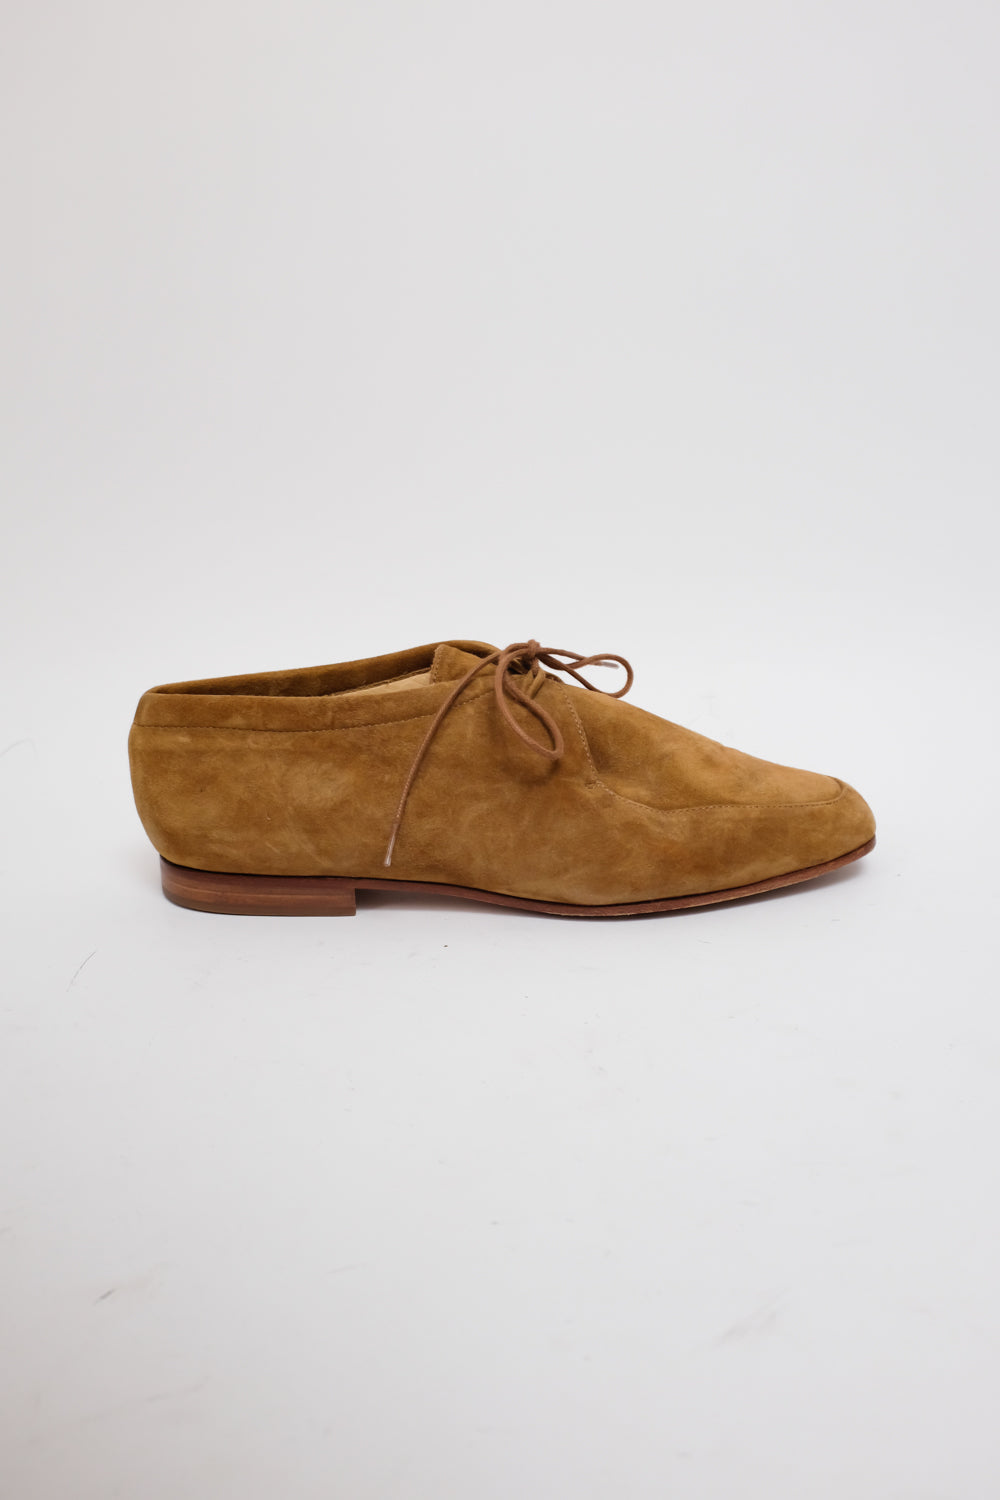 ITALY CAMEL SUEDE LACE UP BROGUES 39